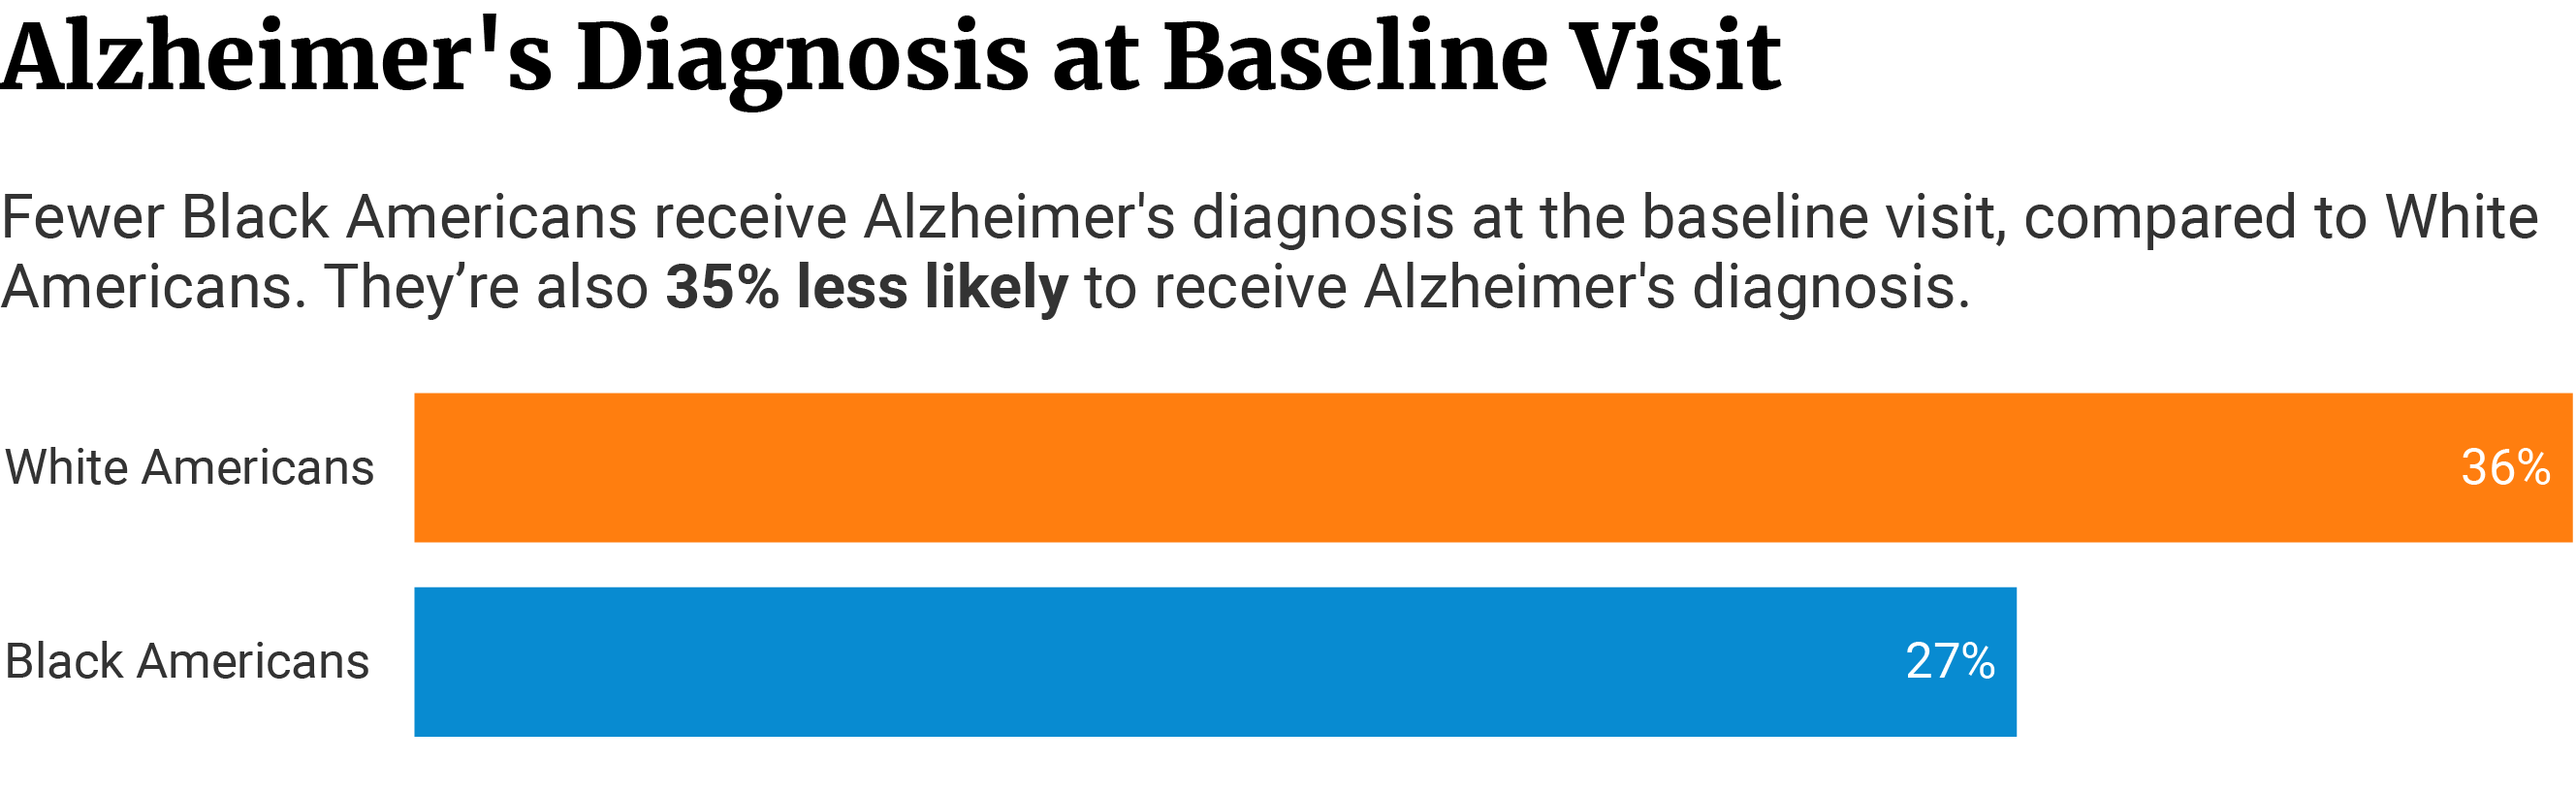 Horizontal bars showing Whites are 36% more likely to be diagnosed with Alzheimer's than Blacks at 27%.